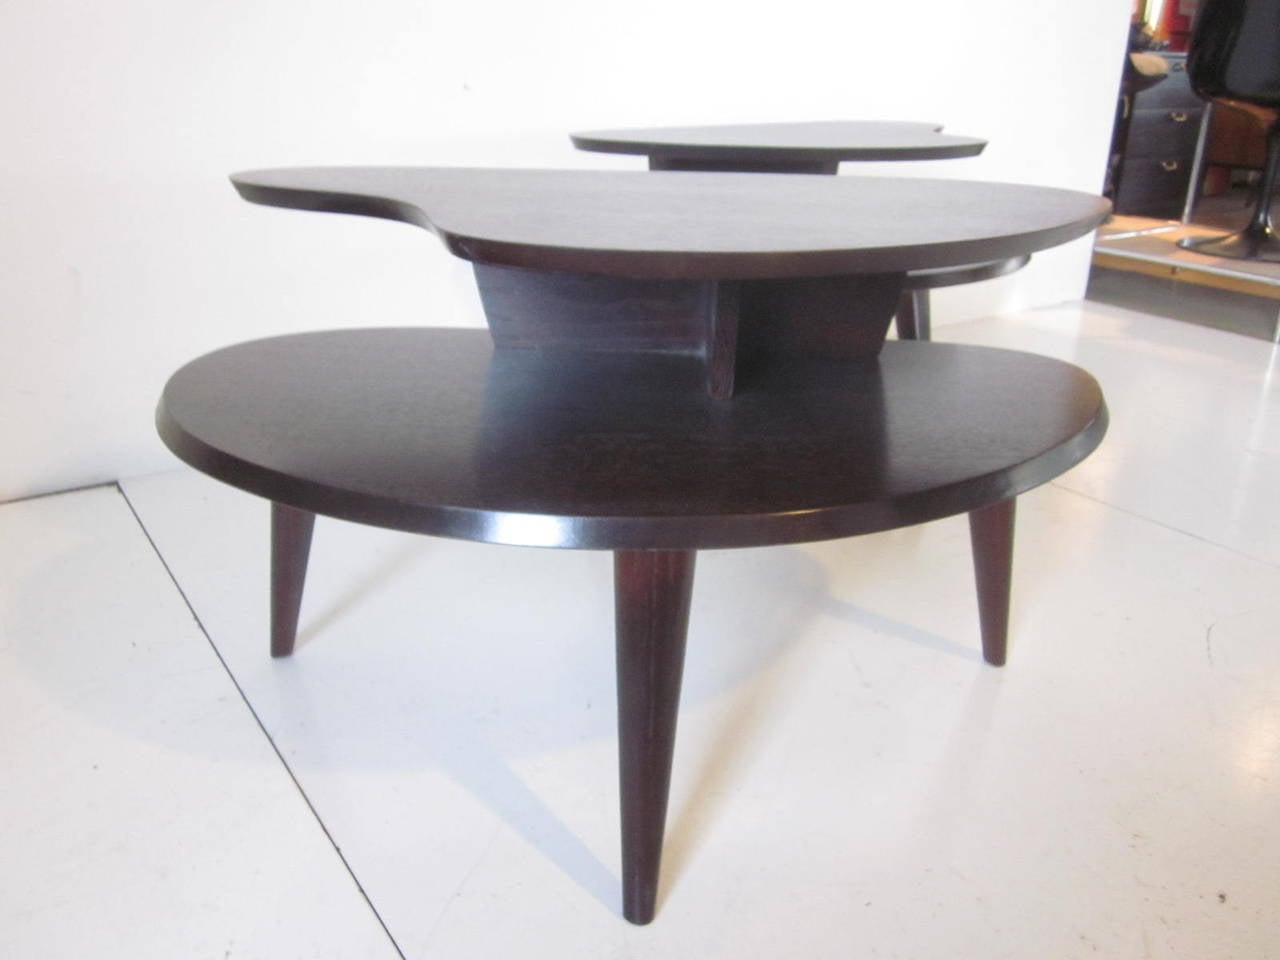 A pair of Mid Century biomorphic shaped side tables in a dark ebony finish.